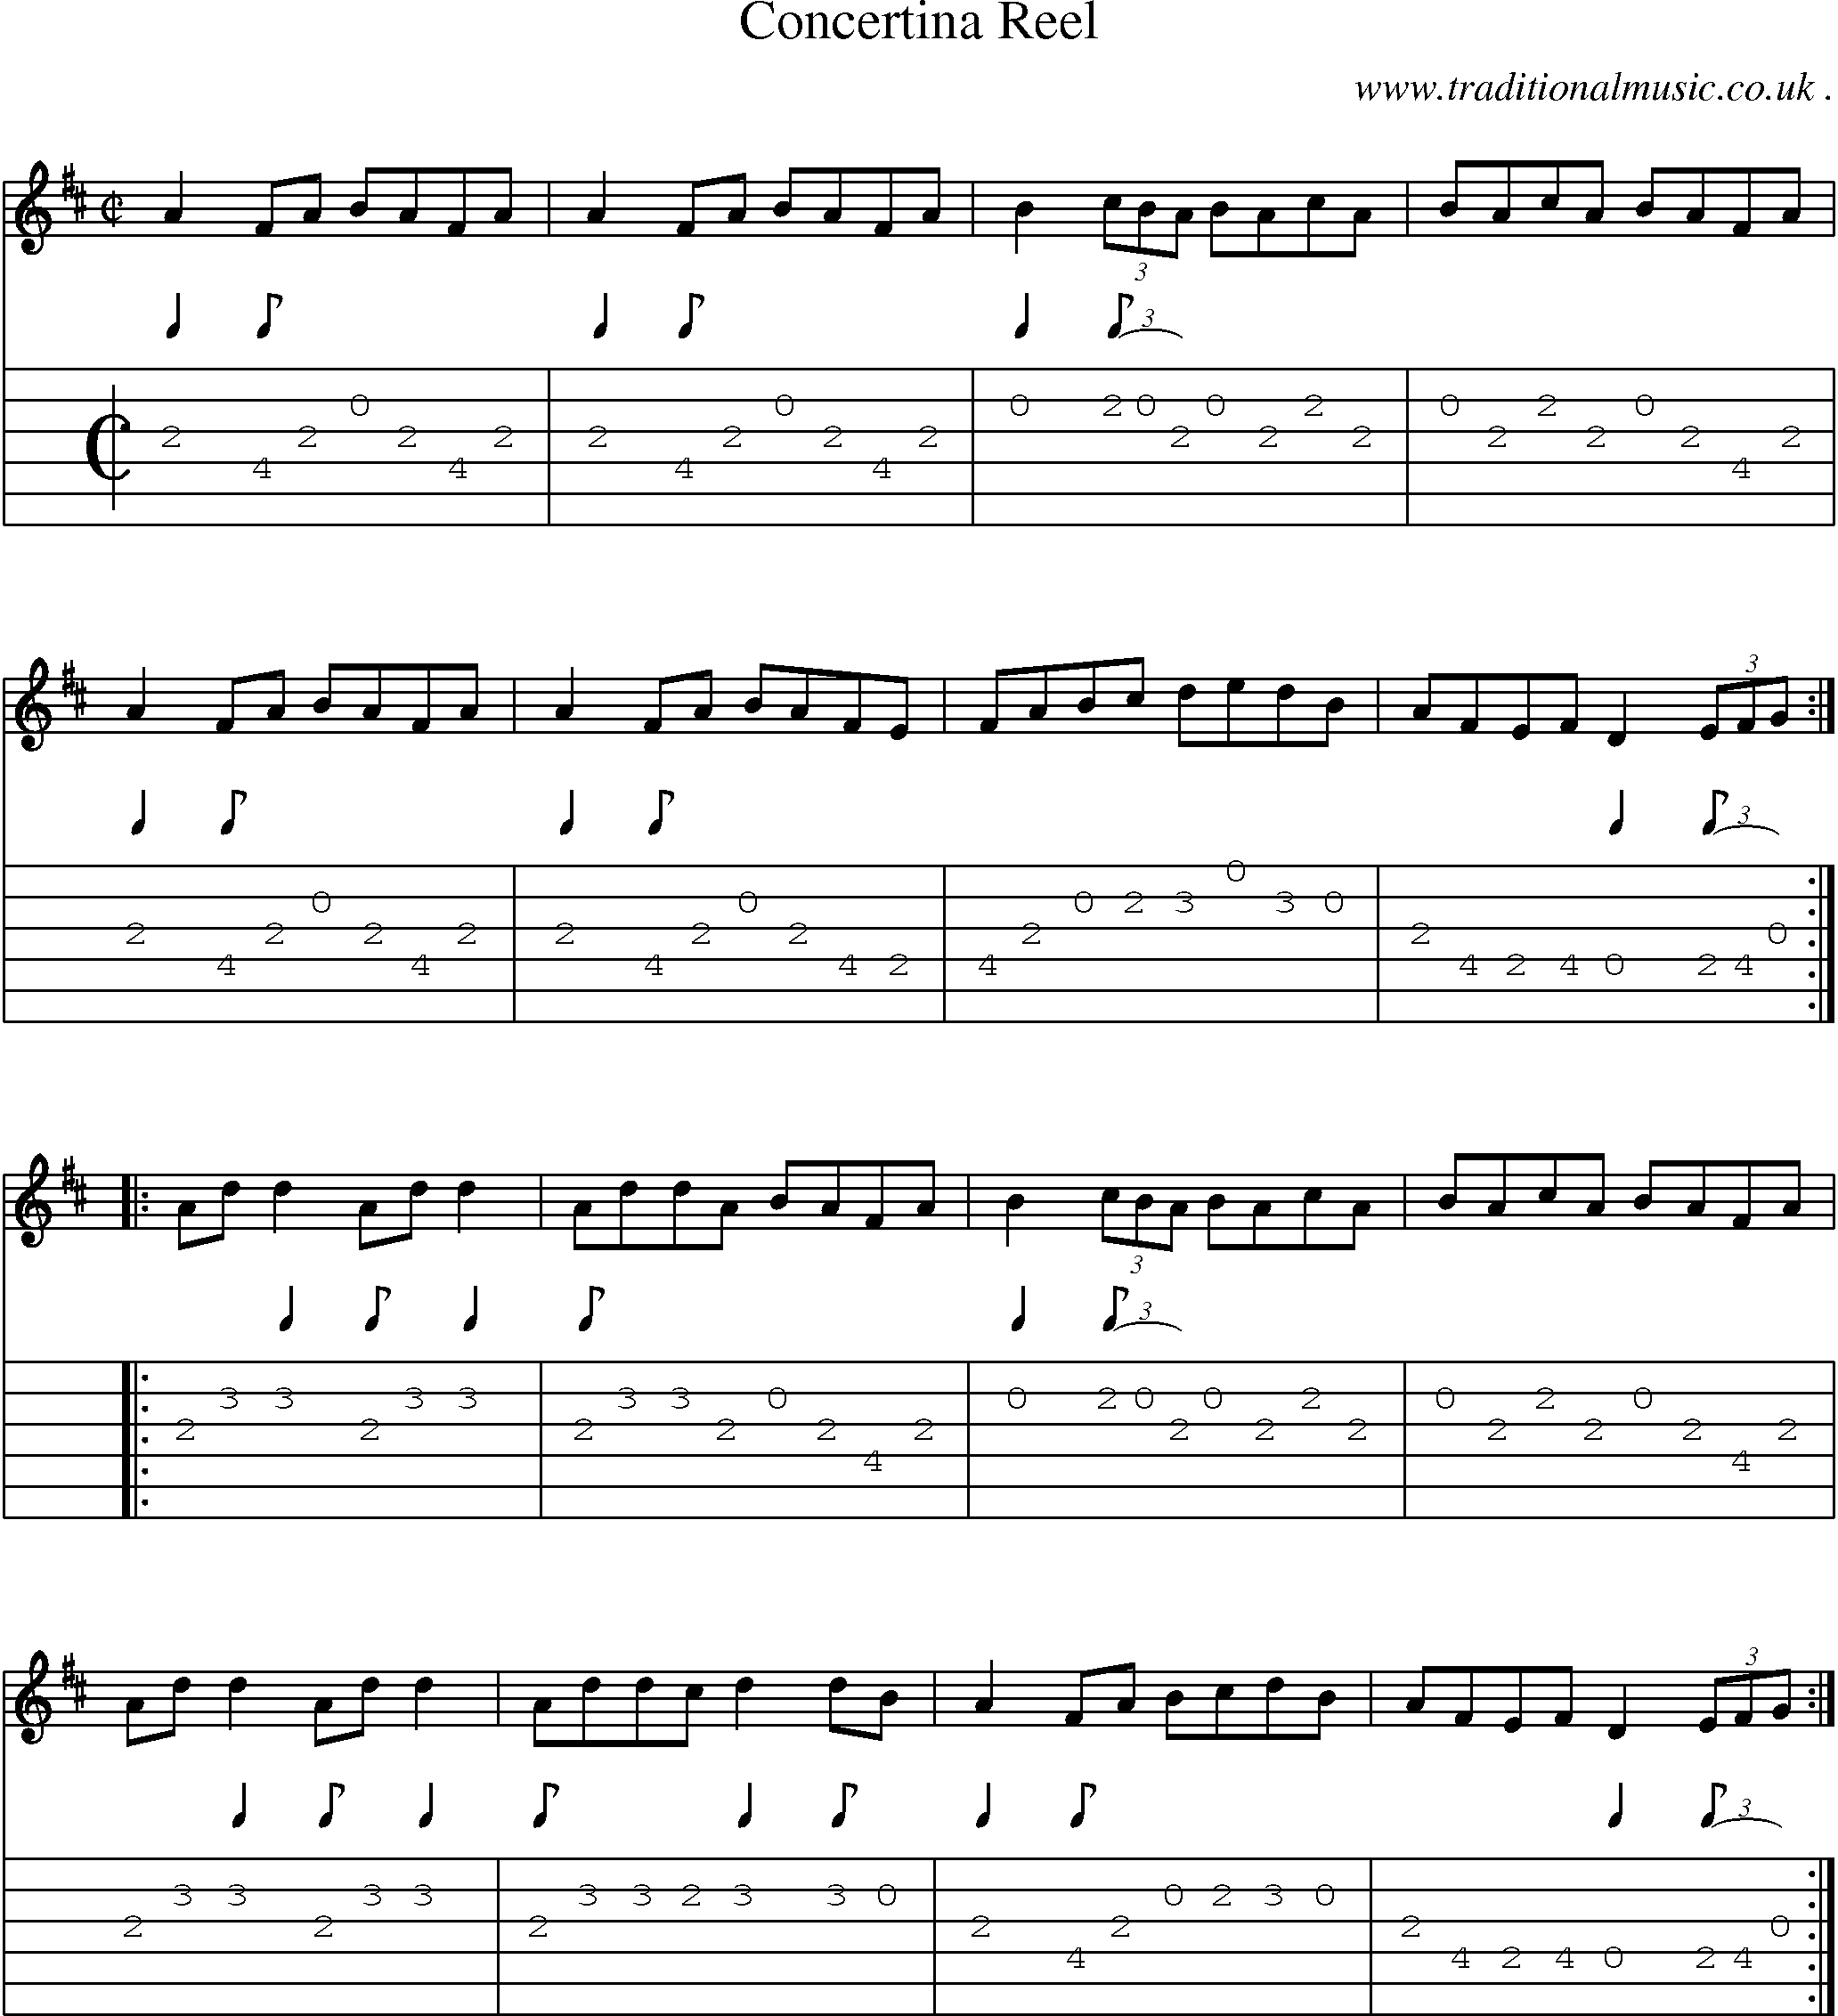 Sheet-Music and Guitar Tabs for Concertina Reel